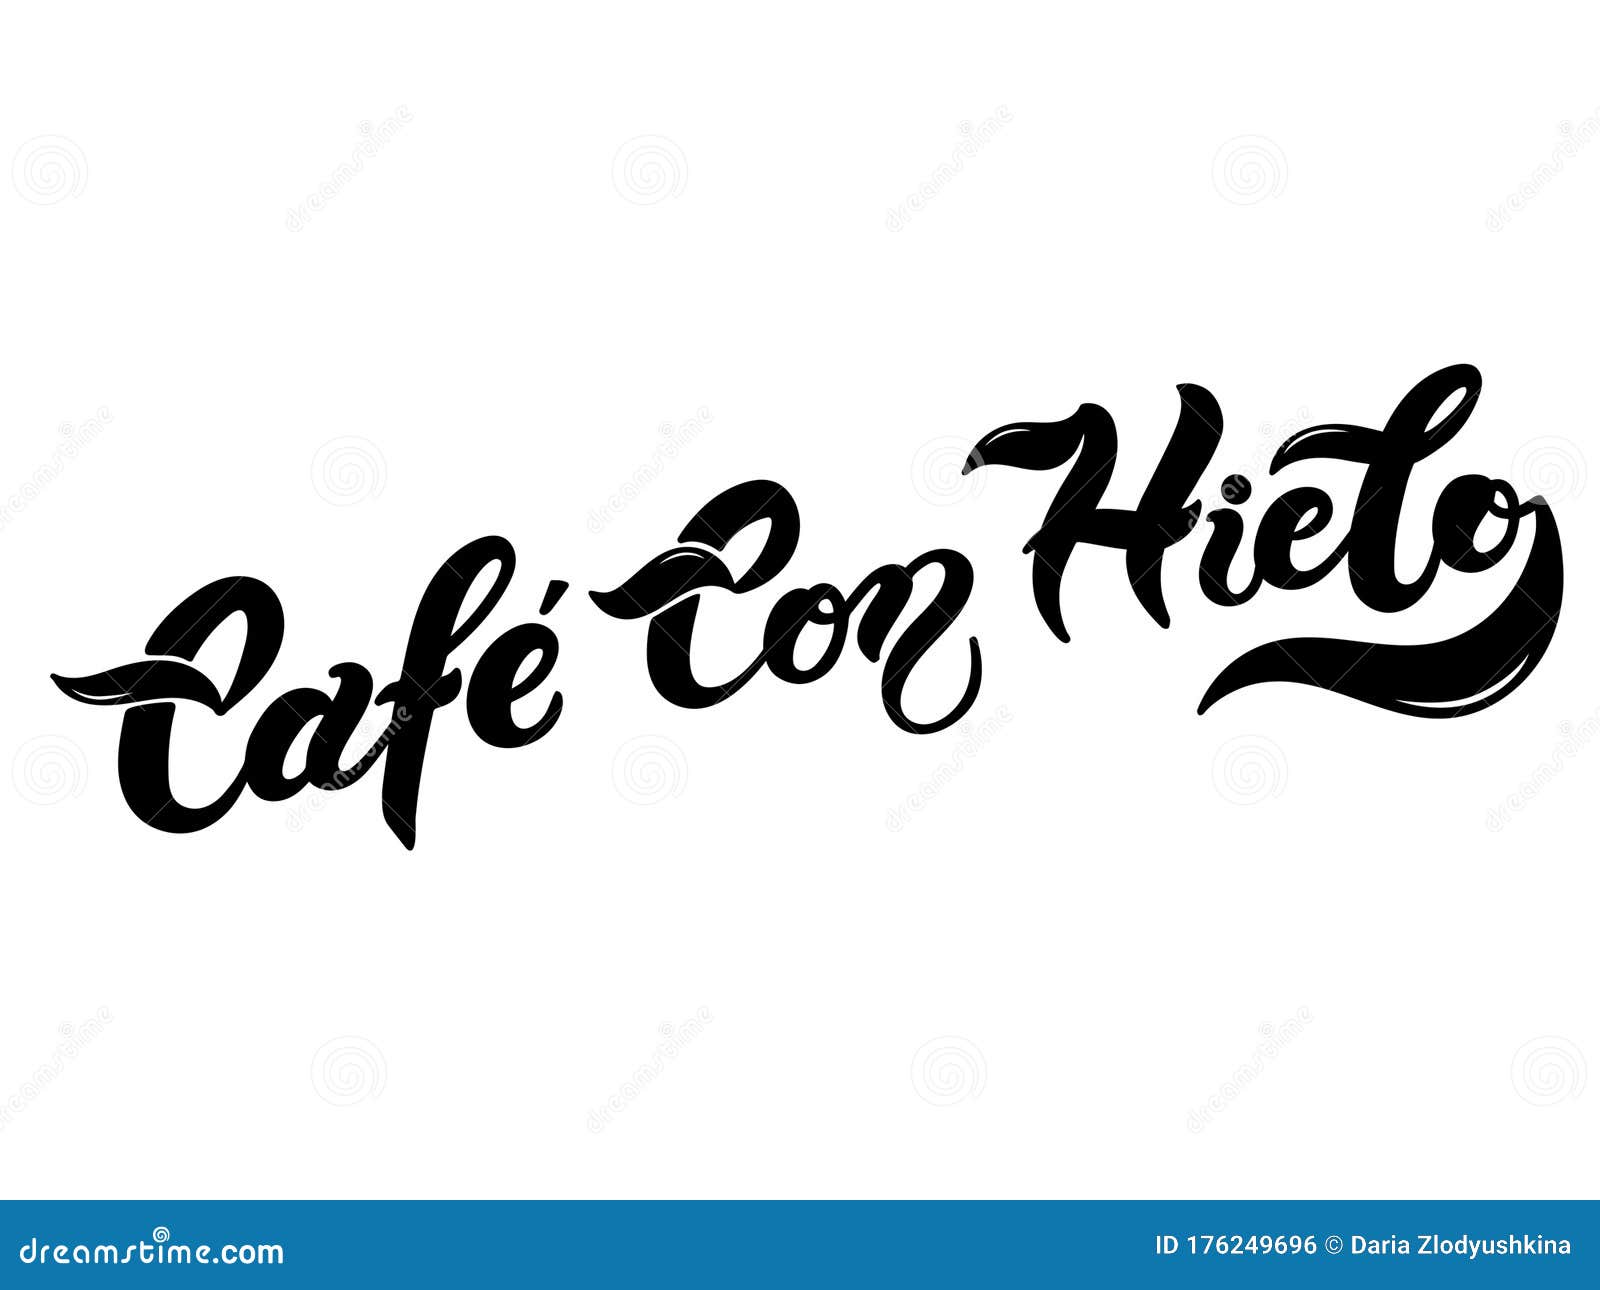 cafe con hielo. the name of the type of coffee. hand drawn lettering